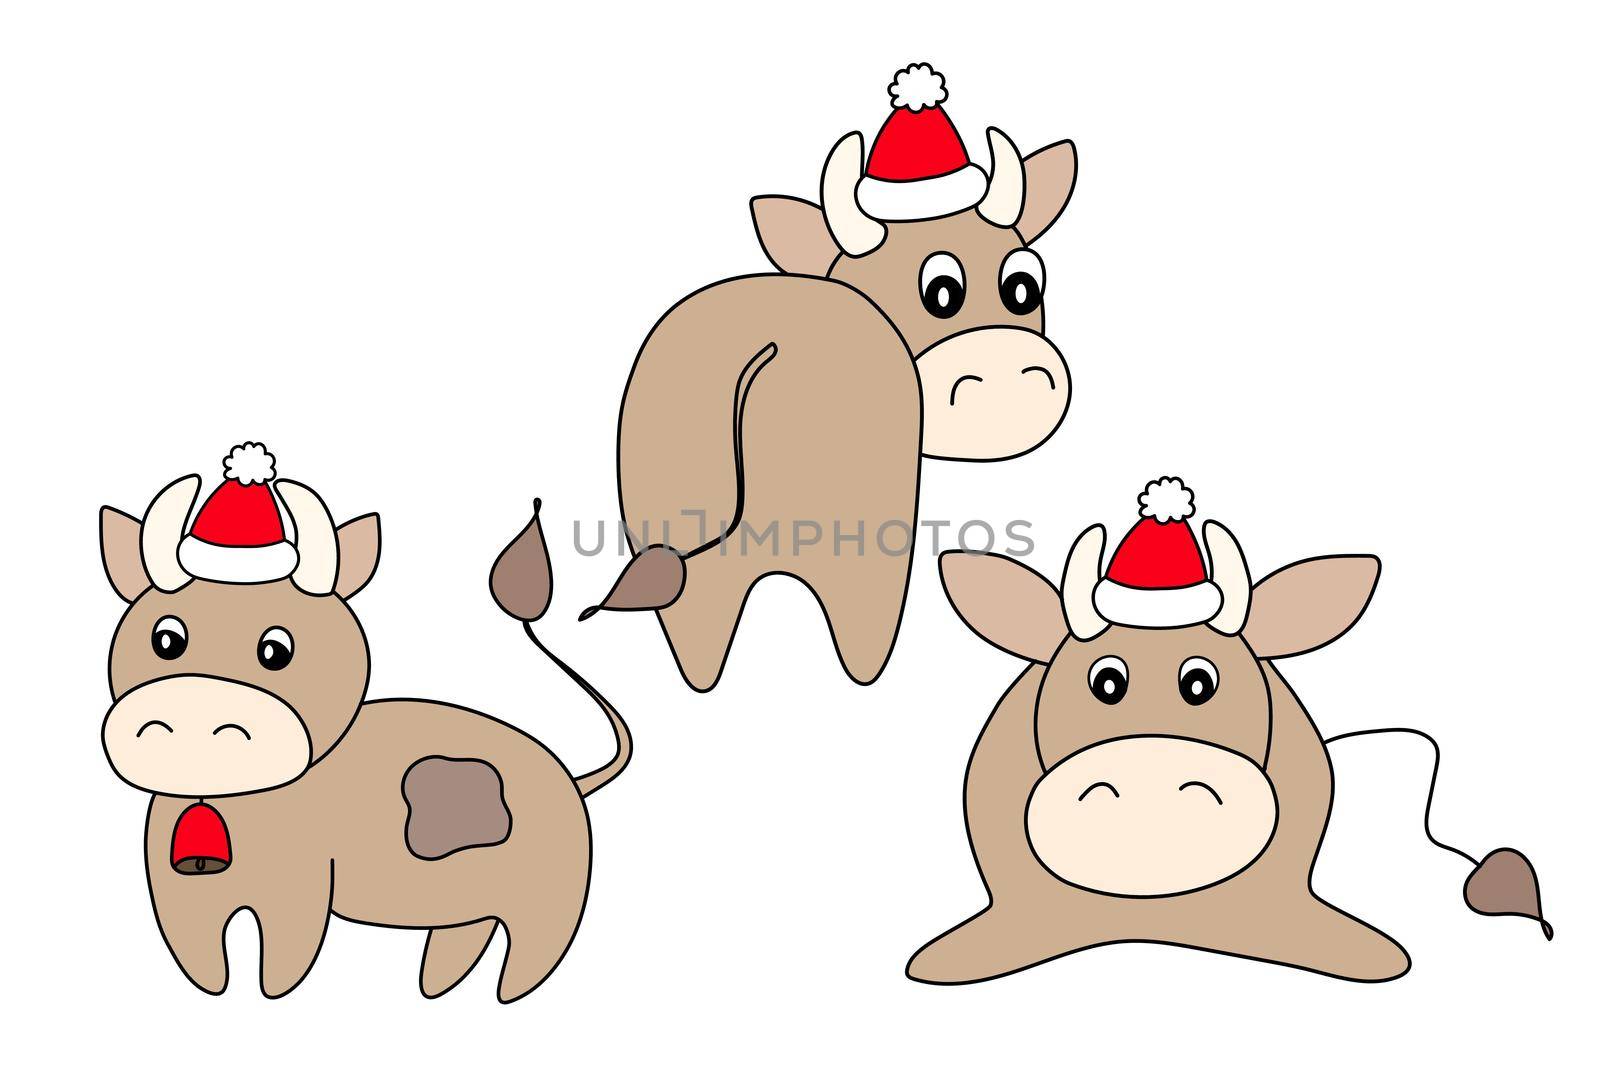 Bull in a winter hat. Vector animal illustrationfor kids. Template adorable character for your design. Colorful cartoon cute cow. New Year and Christmas symbol 2021. Isolated icons.